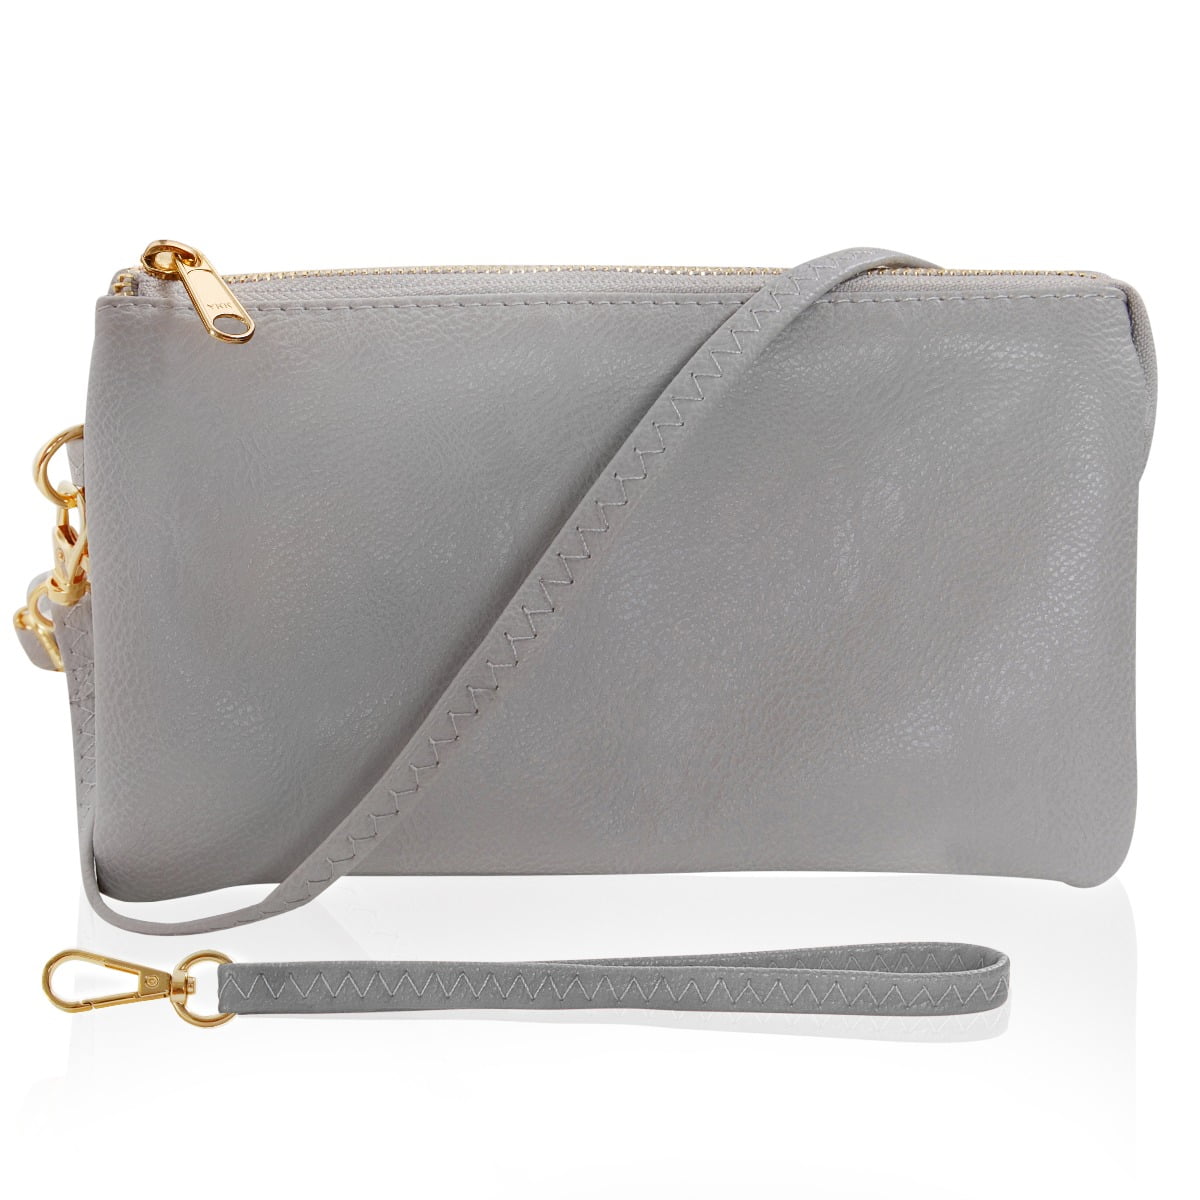 Small Grey Leather Hobo Bag - Slouchy Shoulder Purse | Laroll Bags